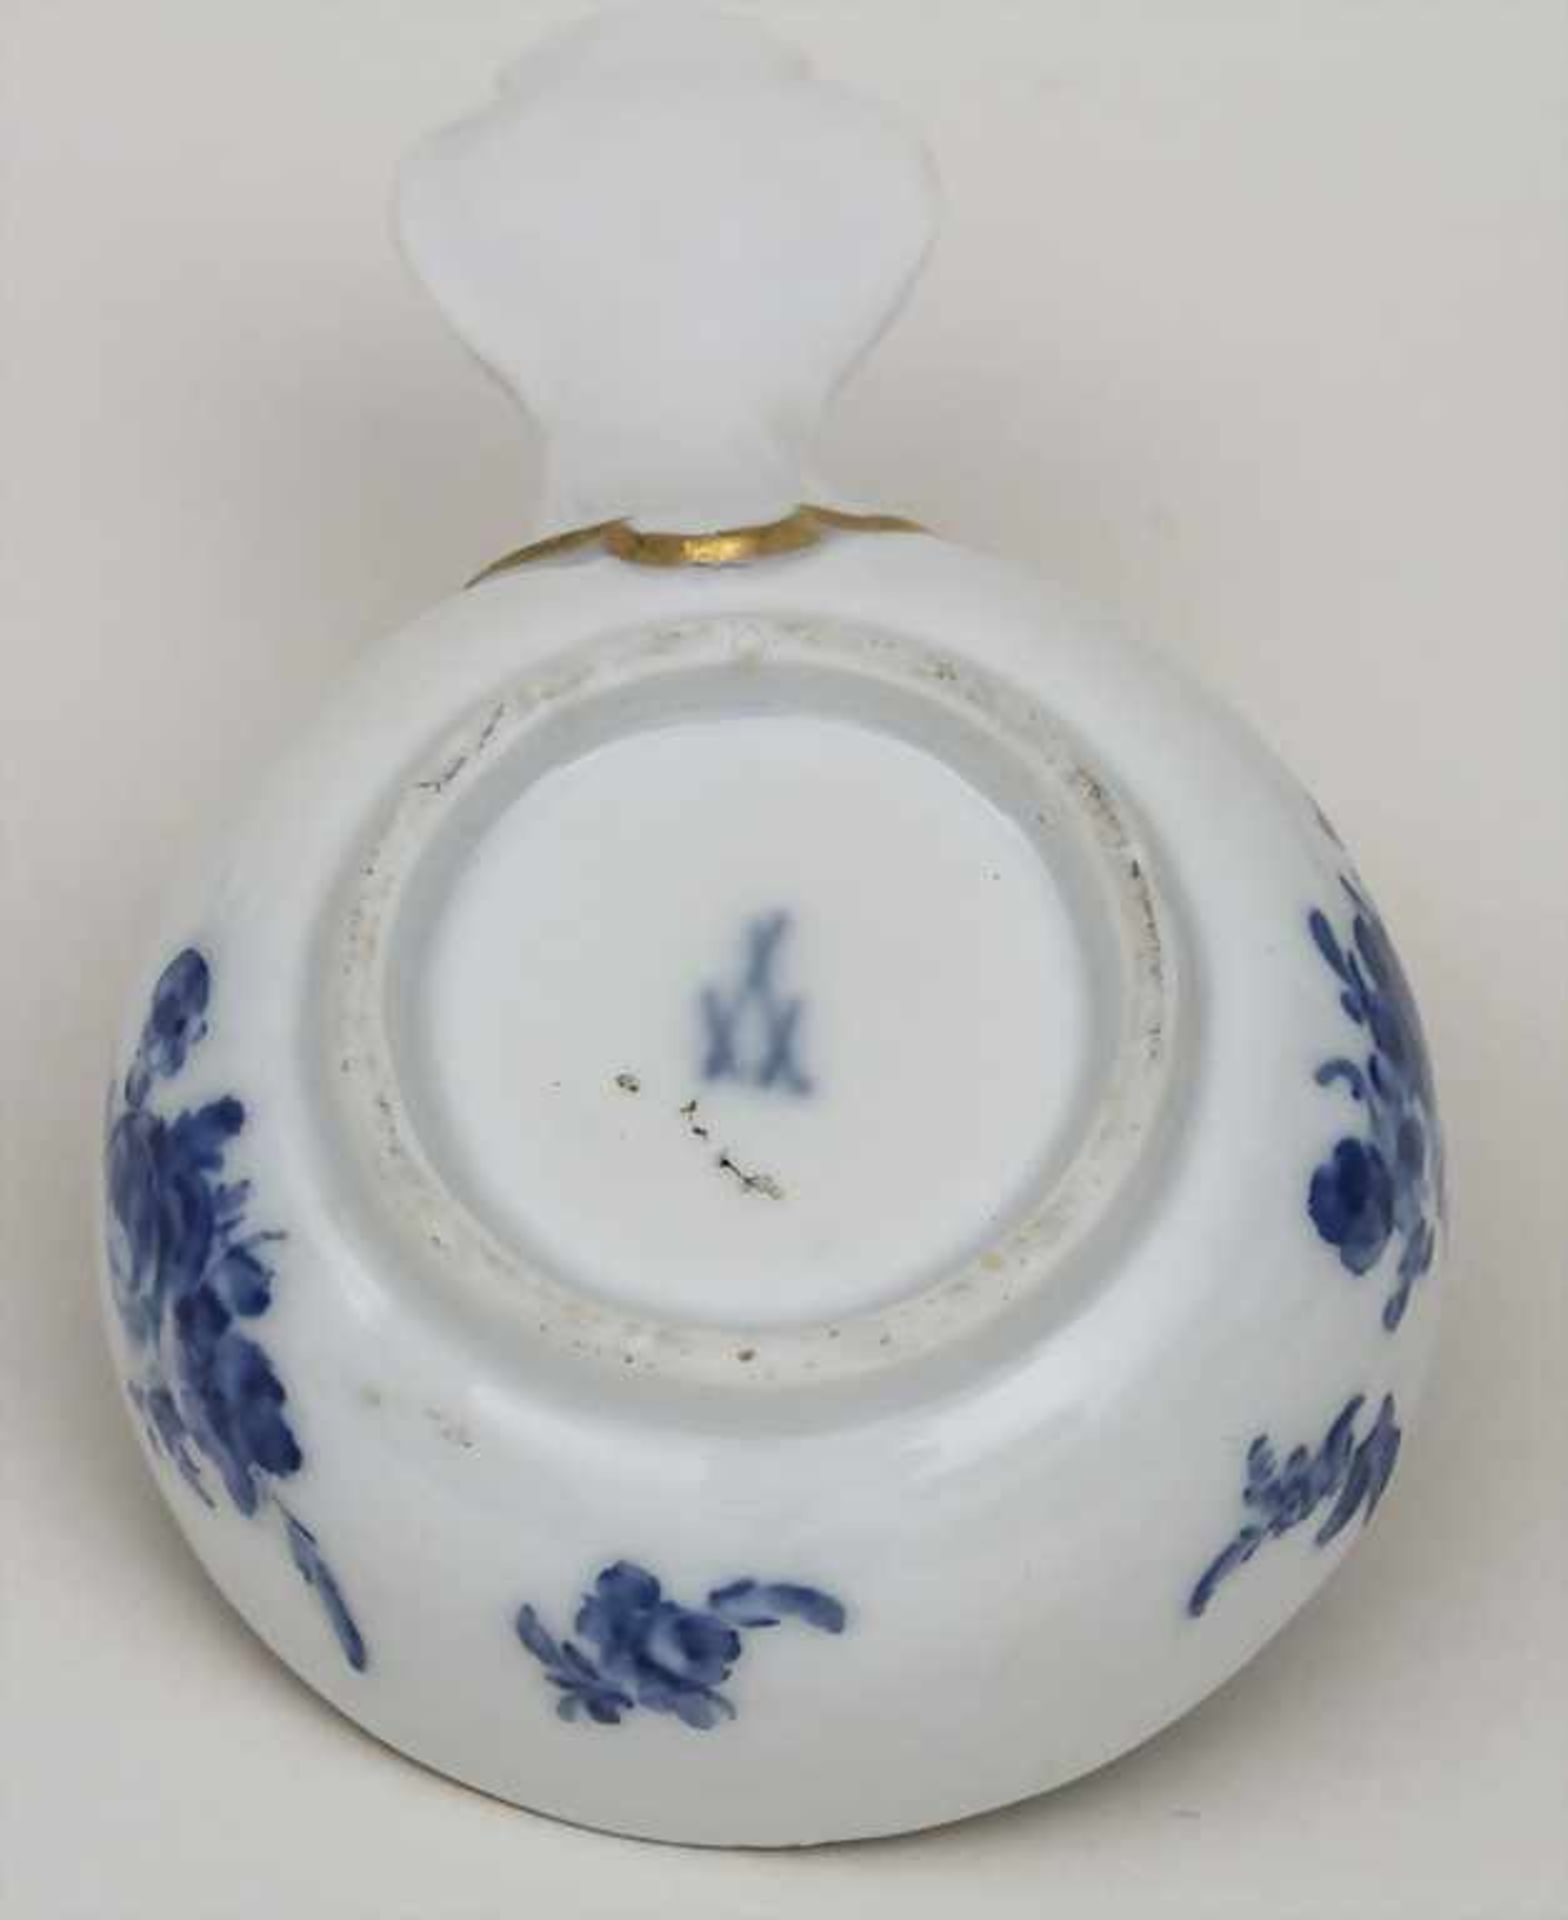 Kleines Henkelgefäß / A small dish with handle, Meissen, Anfang 19. Jh. Material: Porzellan, - Image 2 of 2